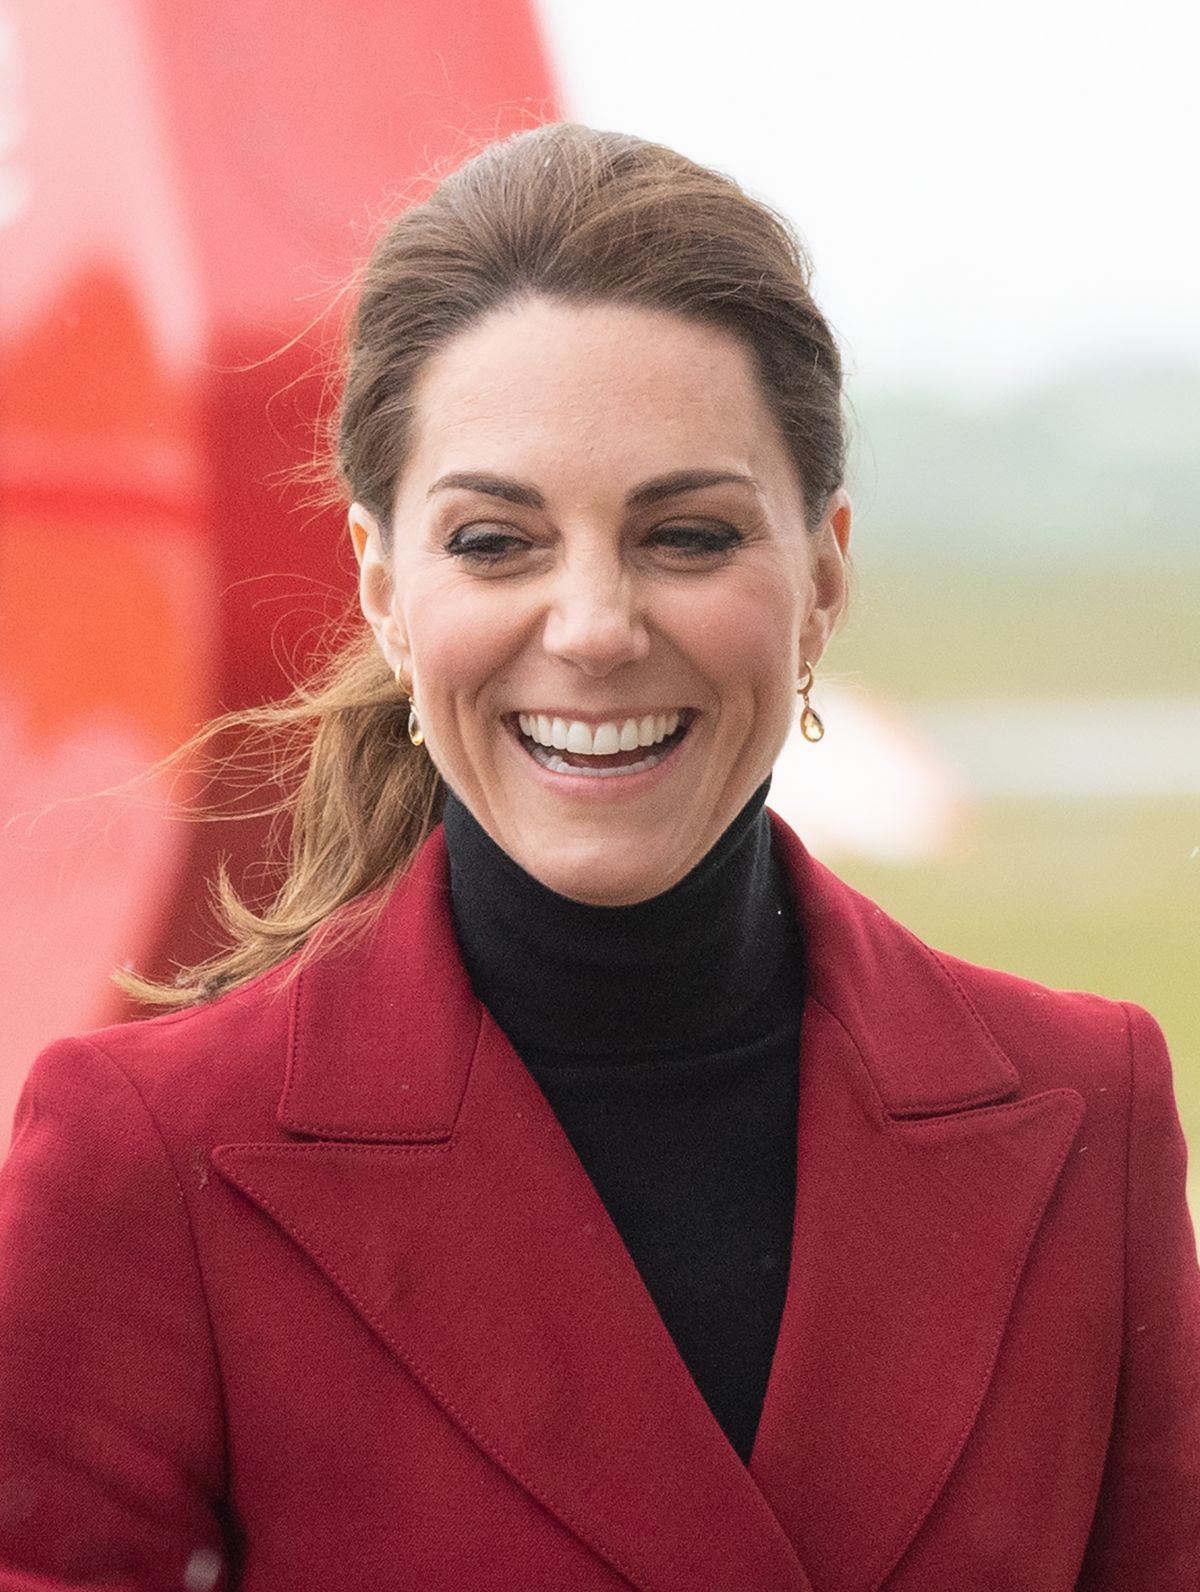 KATE MIDDLETON at Caernarfon Coastguard Search and Rescue Helicopter ...